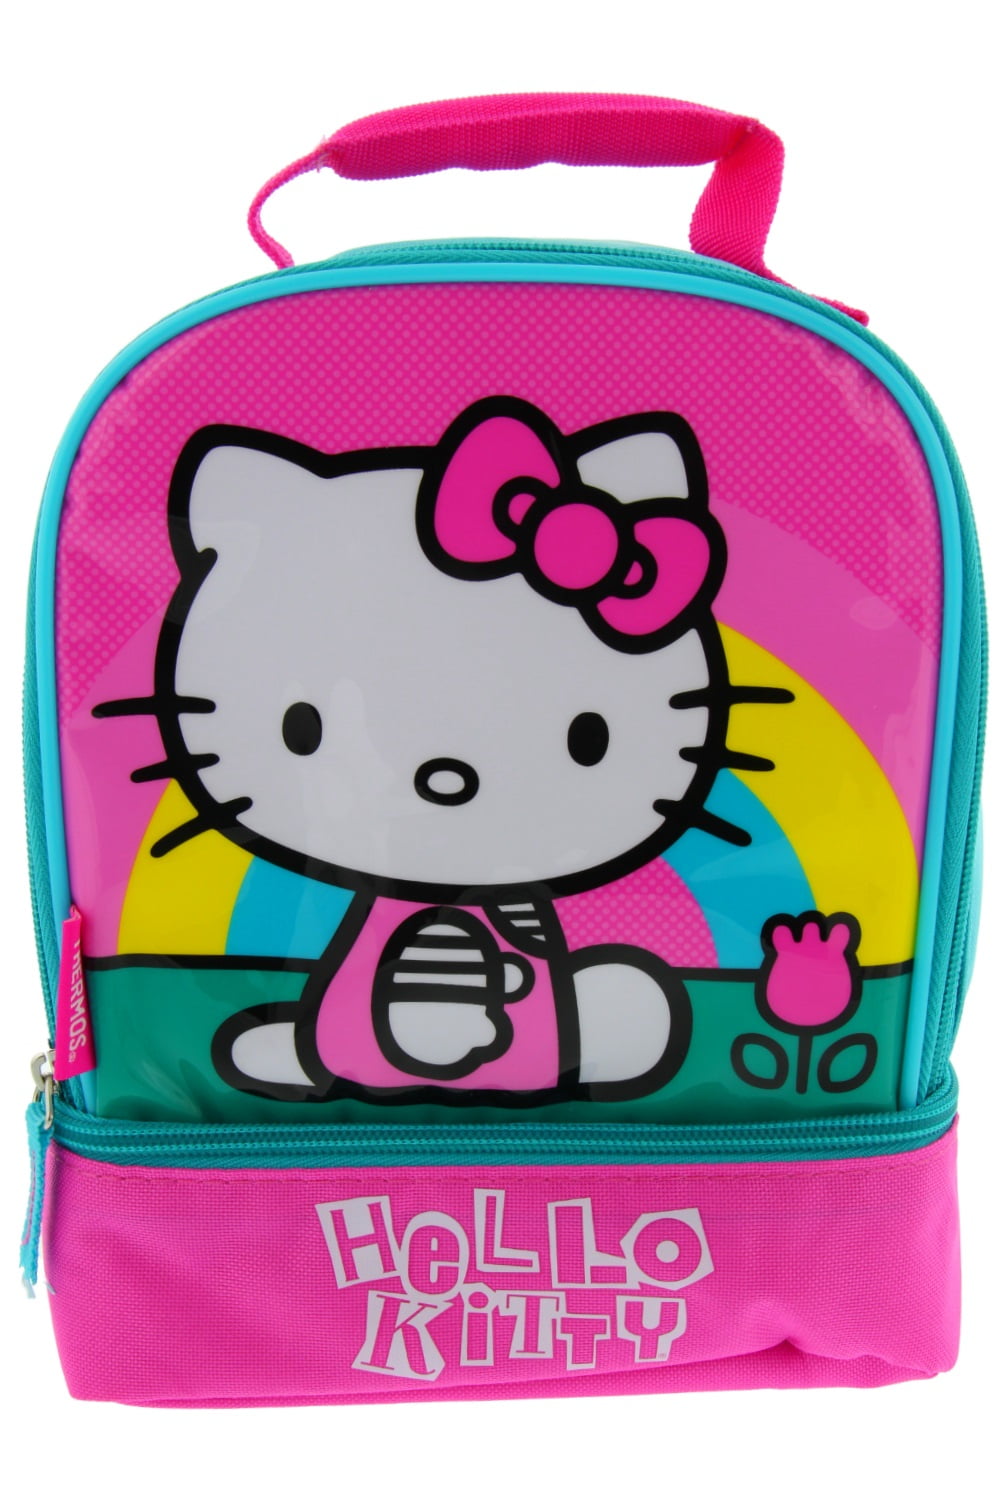 Genuine Thermos Hello Kitty Round Lunch Bag 